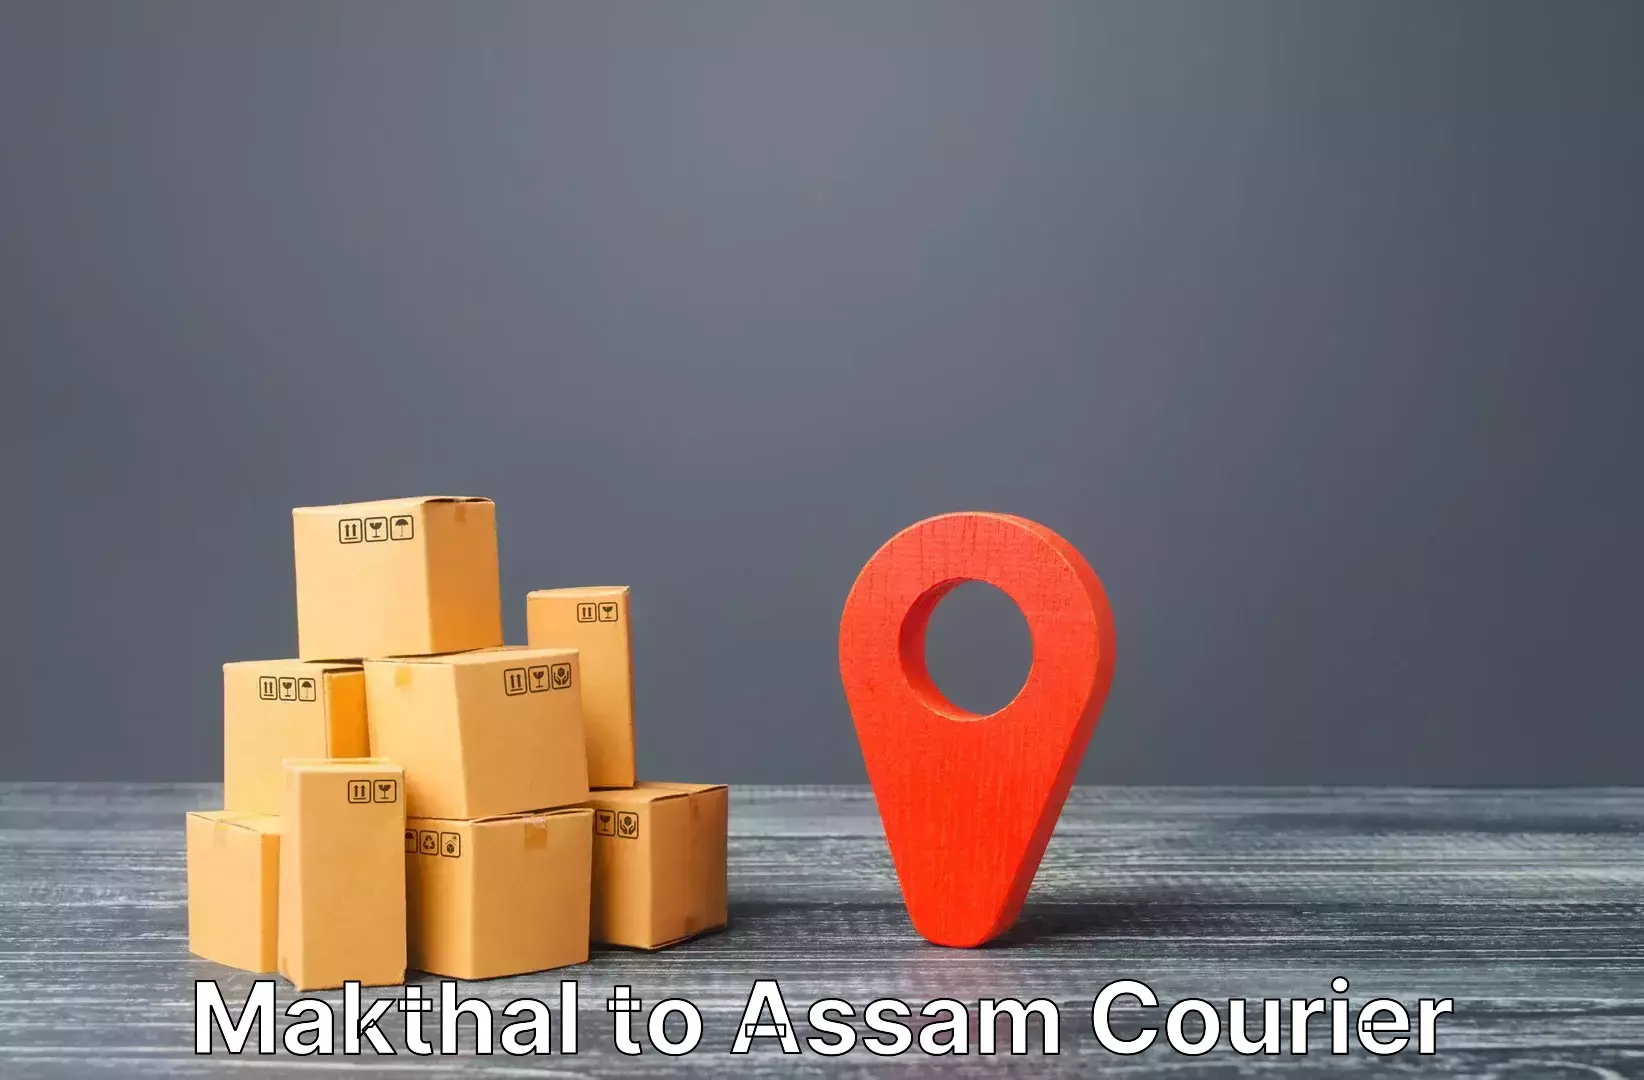 Luggage transport consulting in Makthal to Karbi Anglong